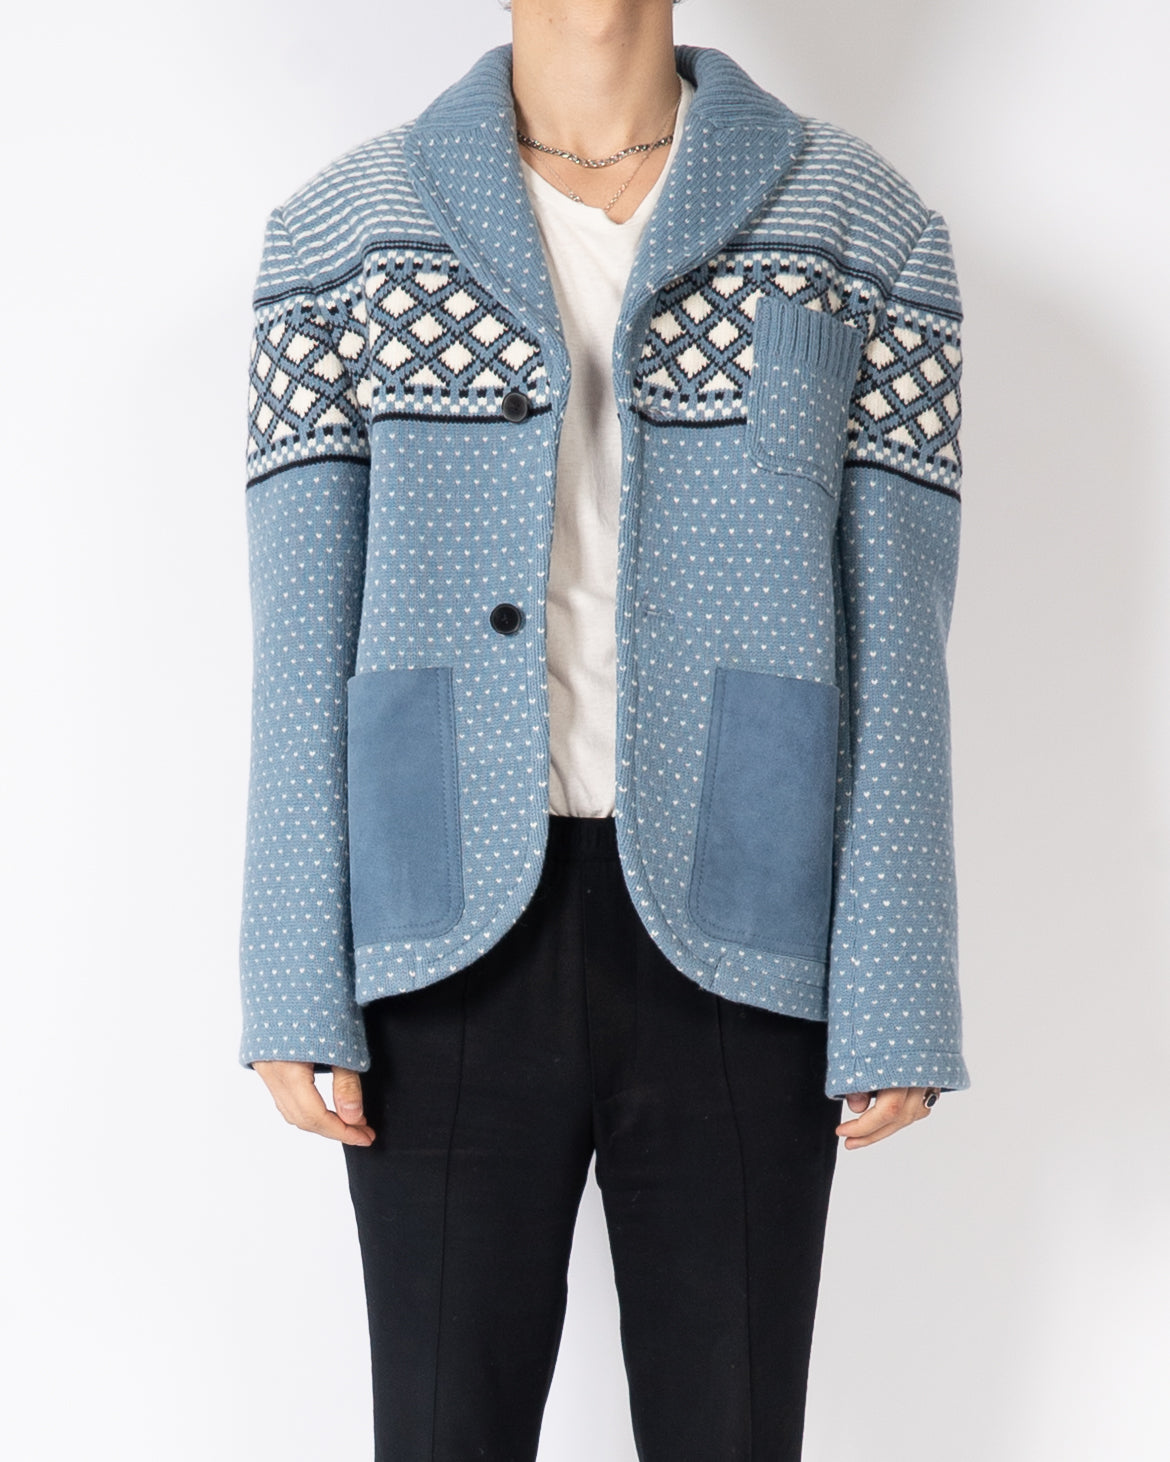 FW20 Blue Knitted Jacquard Jacket 1 of 1 Sample